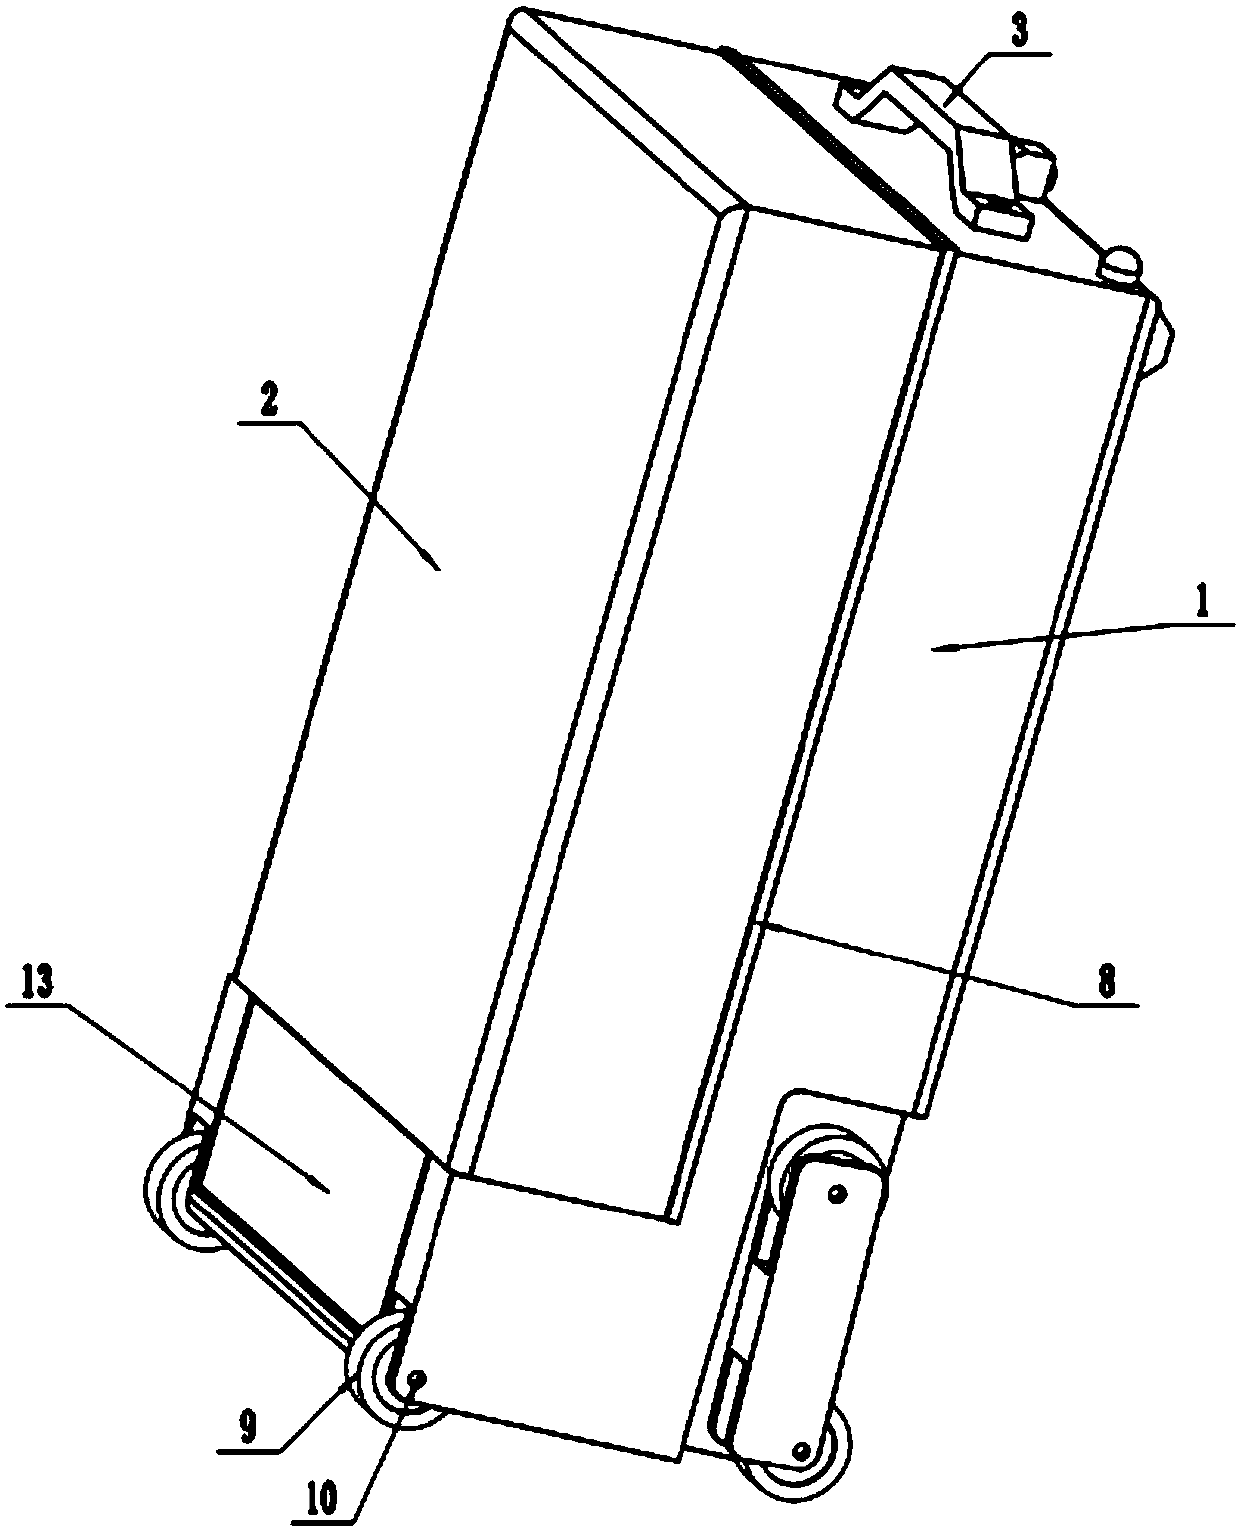 self-propelled suitcase